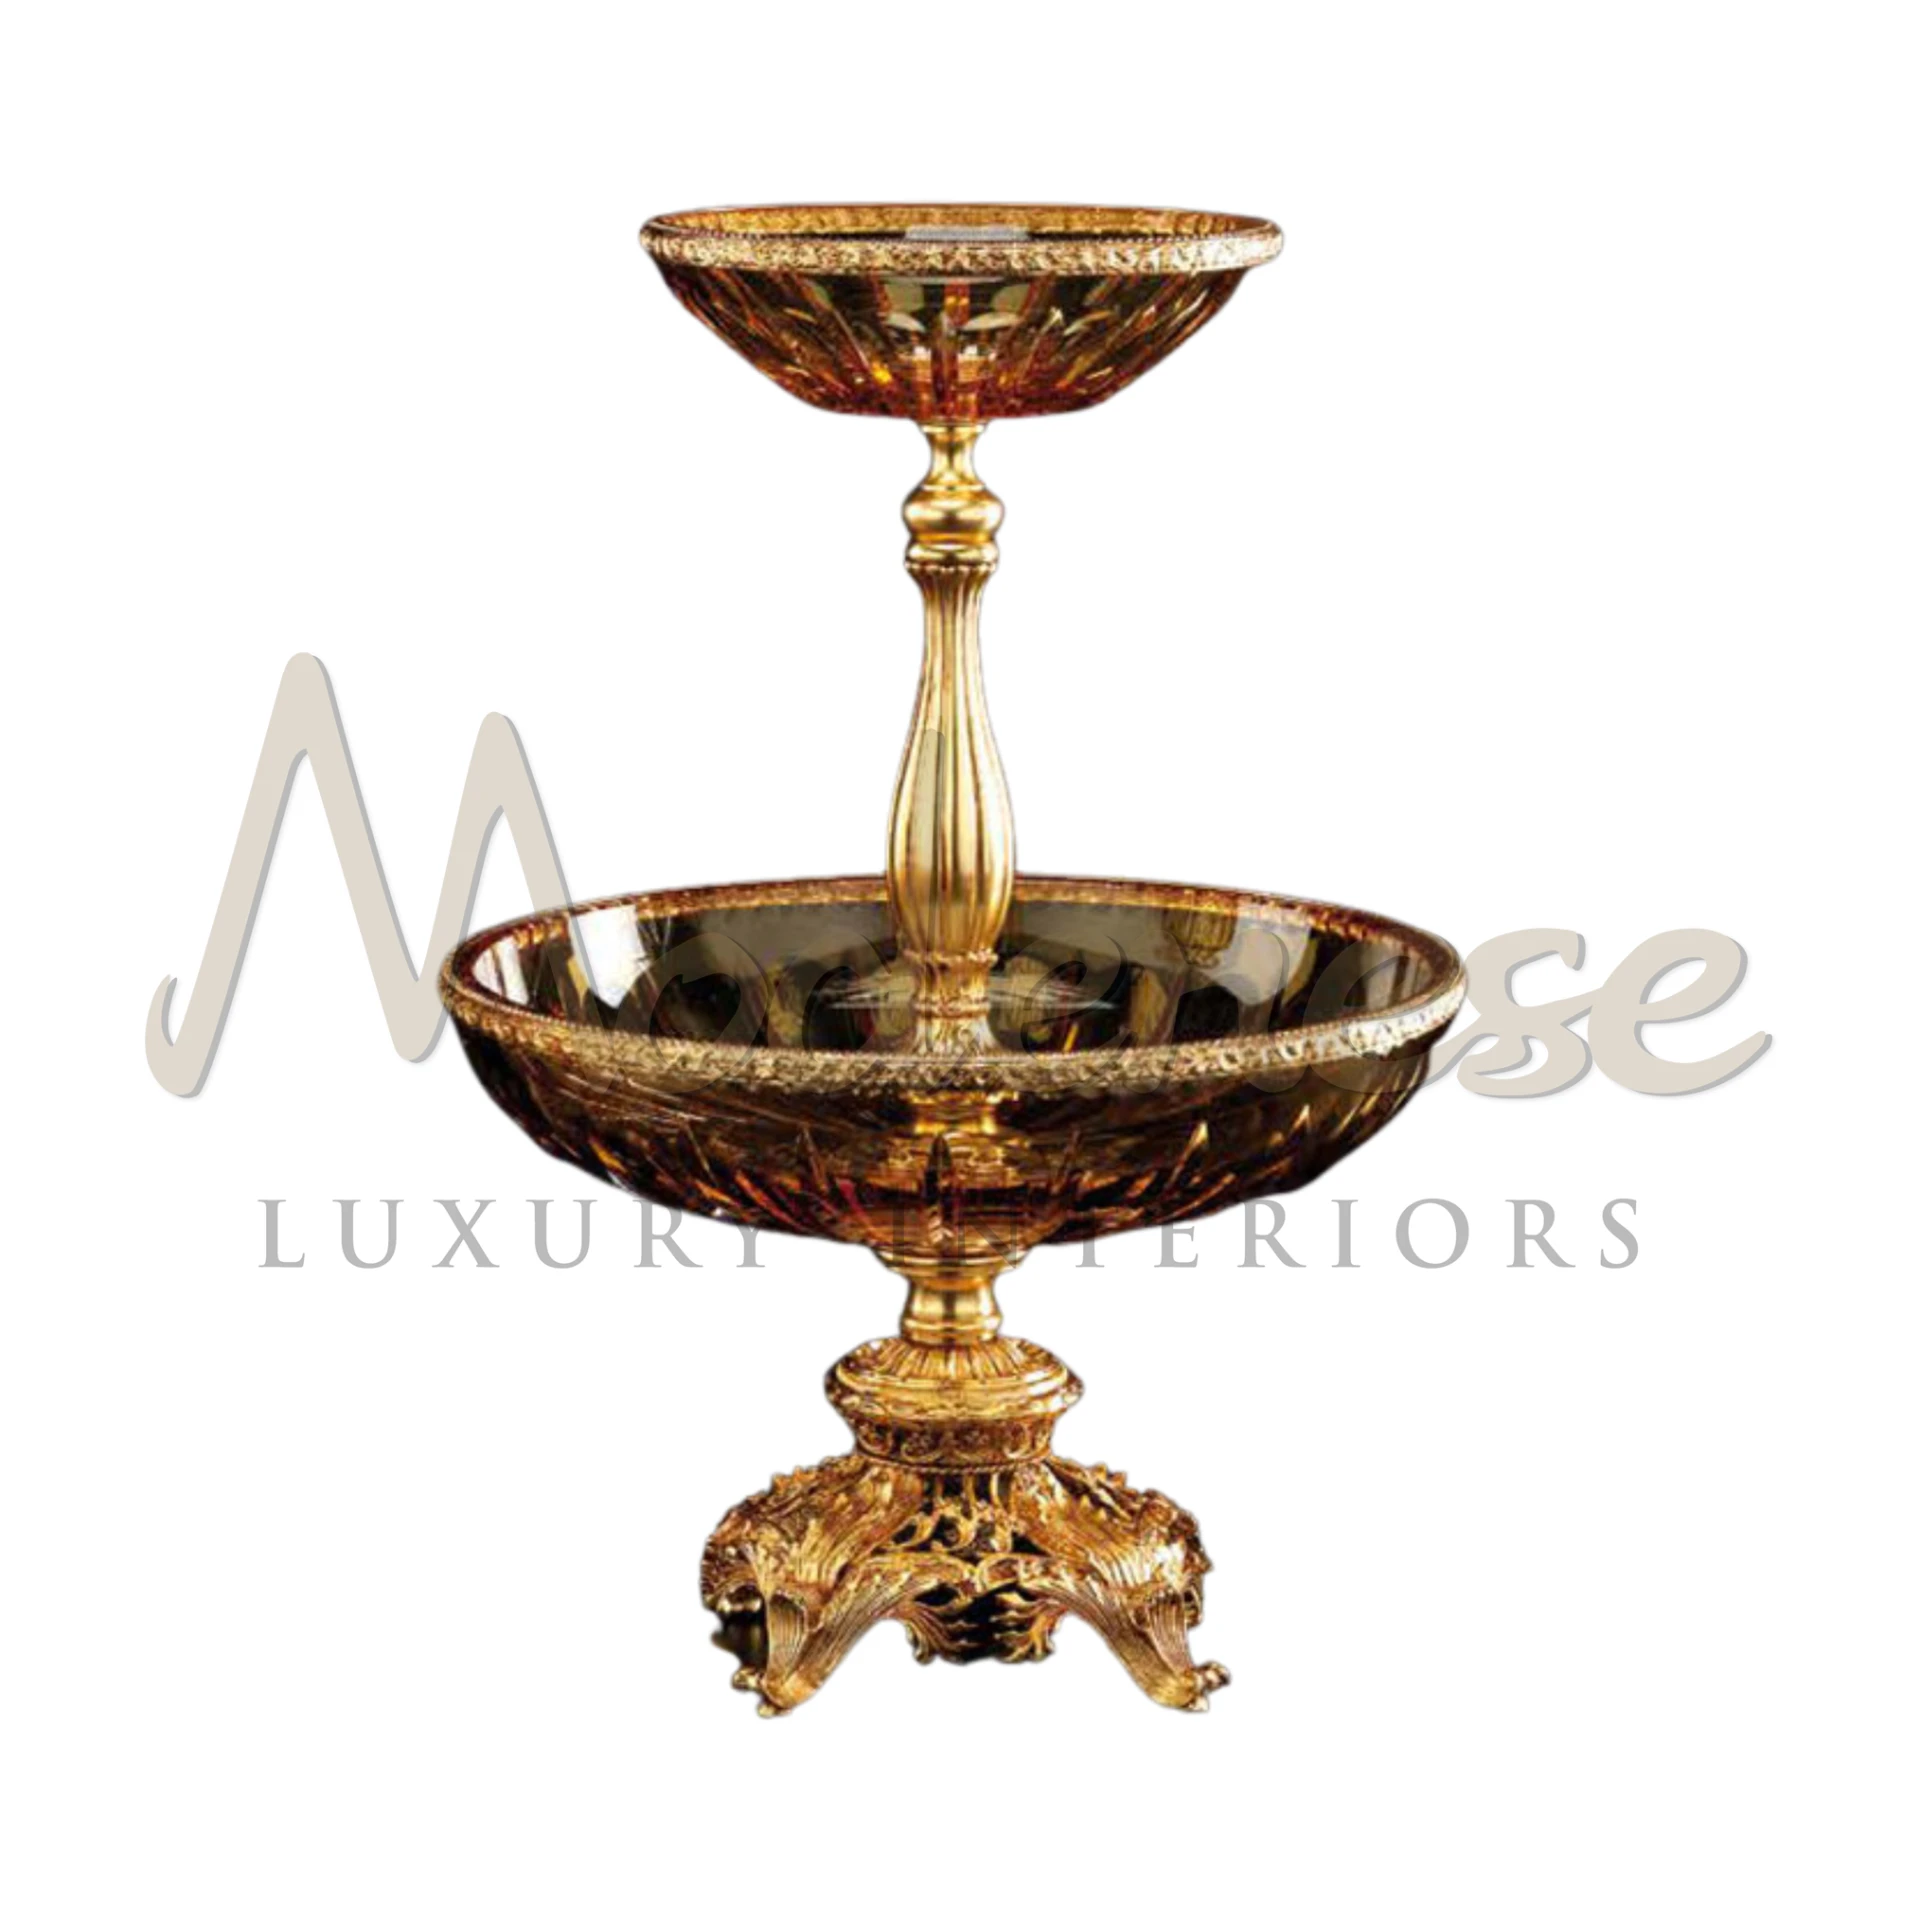 Double crystal vase with elegant stem, perfect for luxury and classic interior design, showcases baroque and sophisticated style.